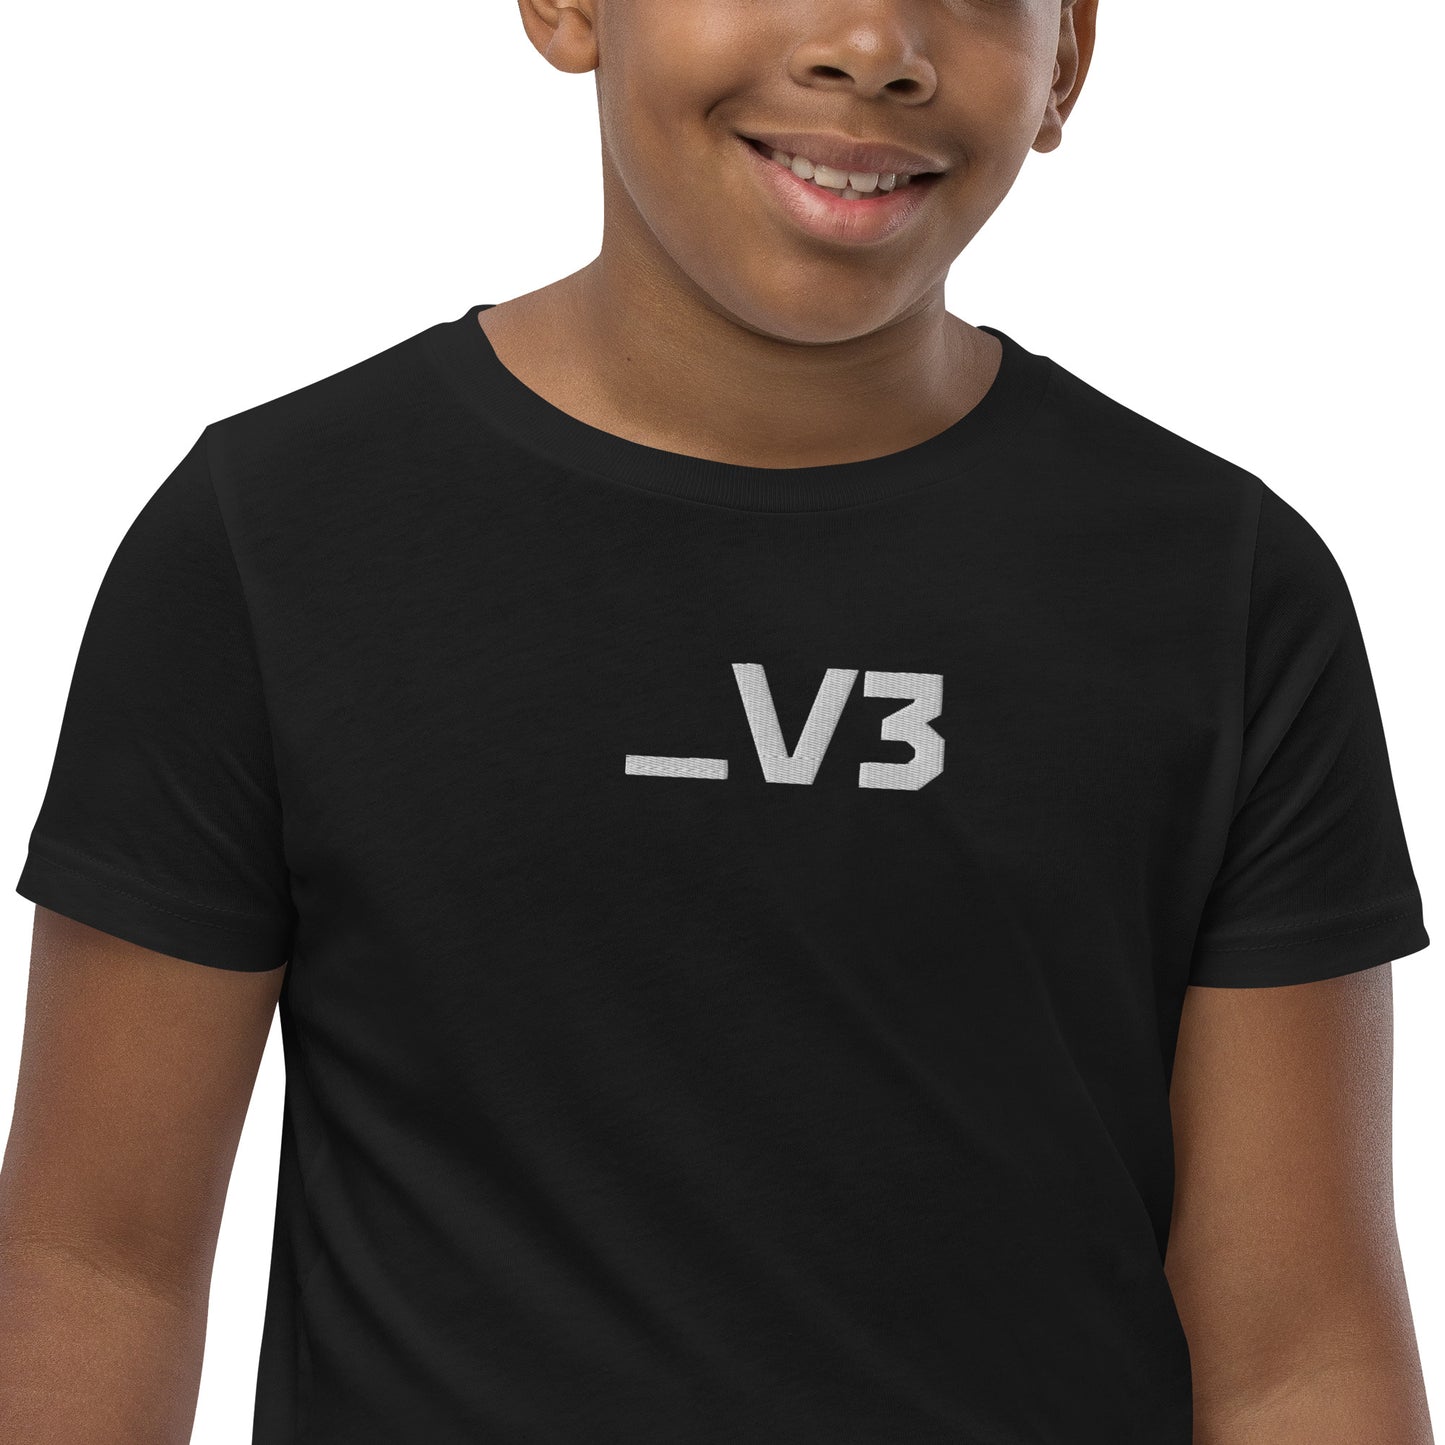 _V3 Embroidered Youth Short Sleeve T-Shirt